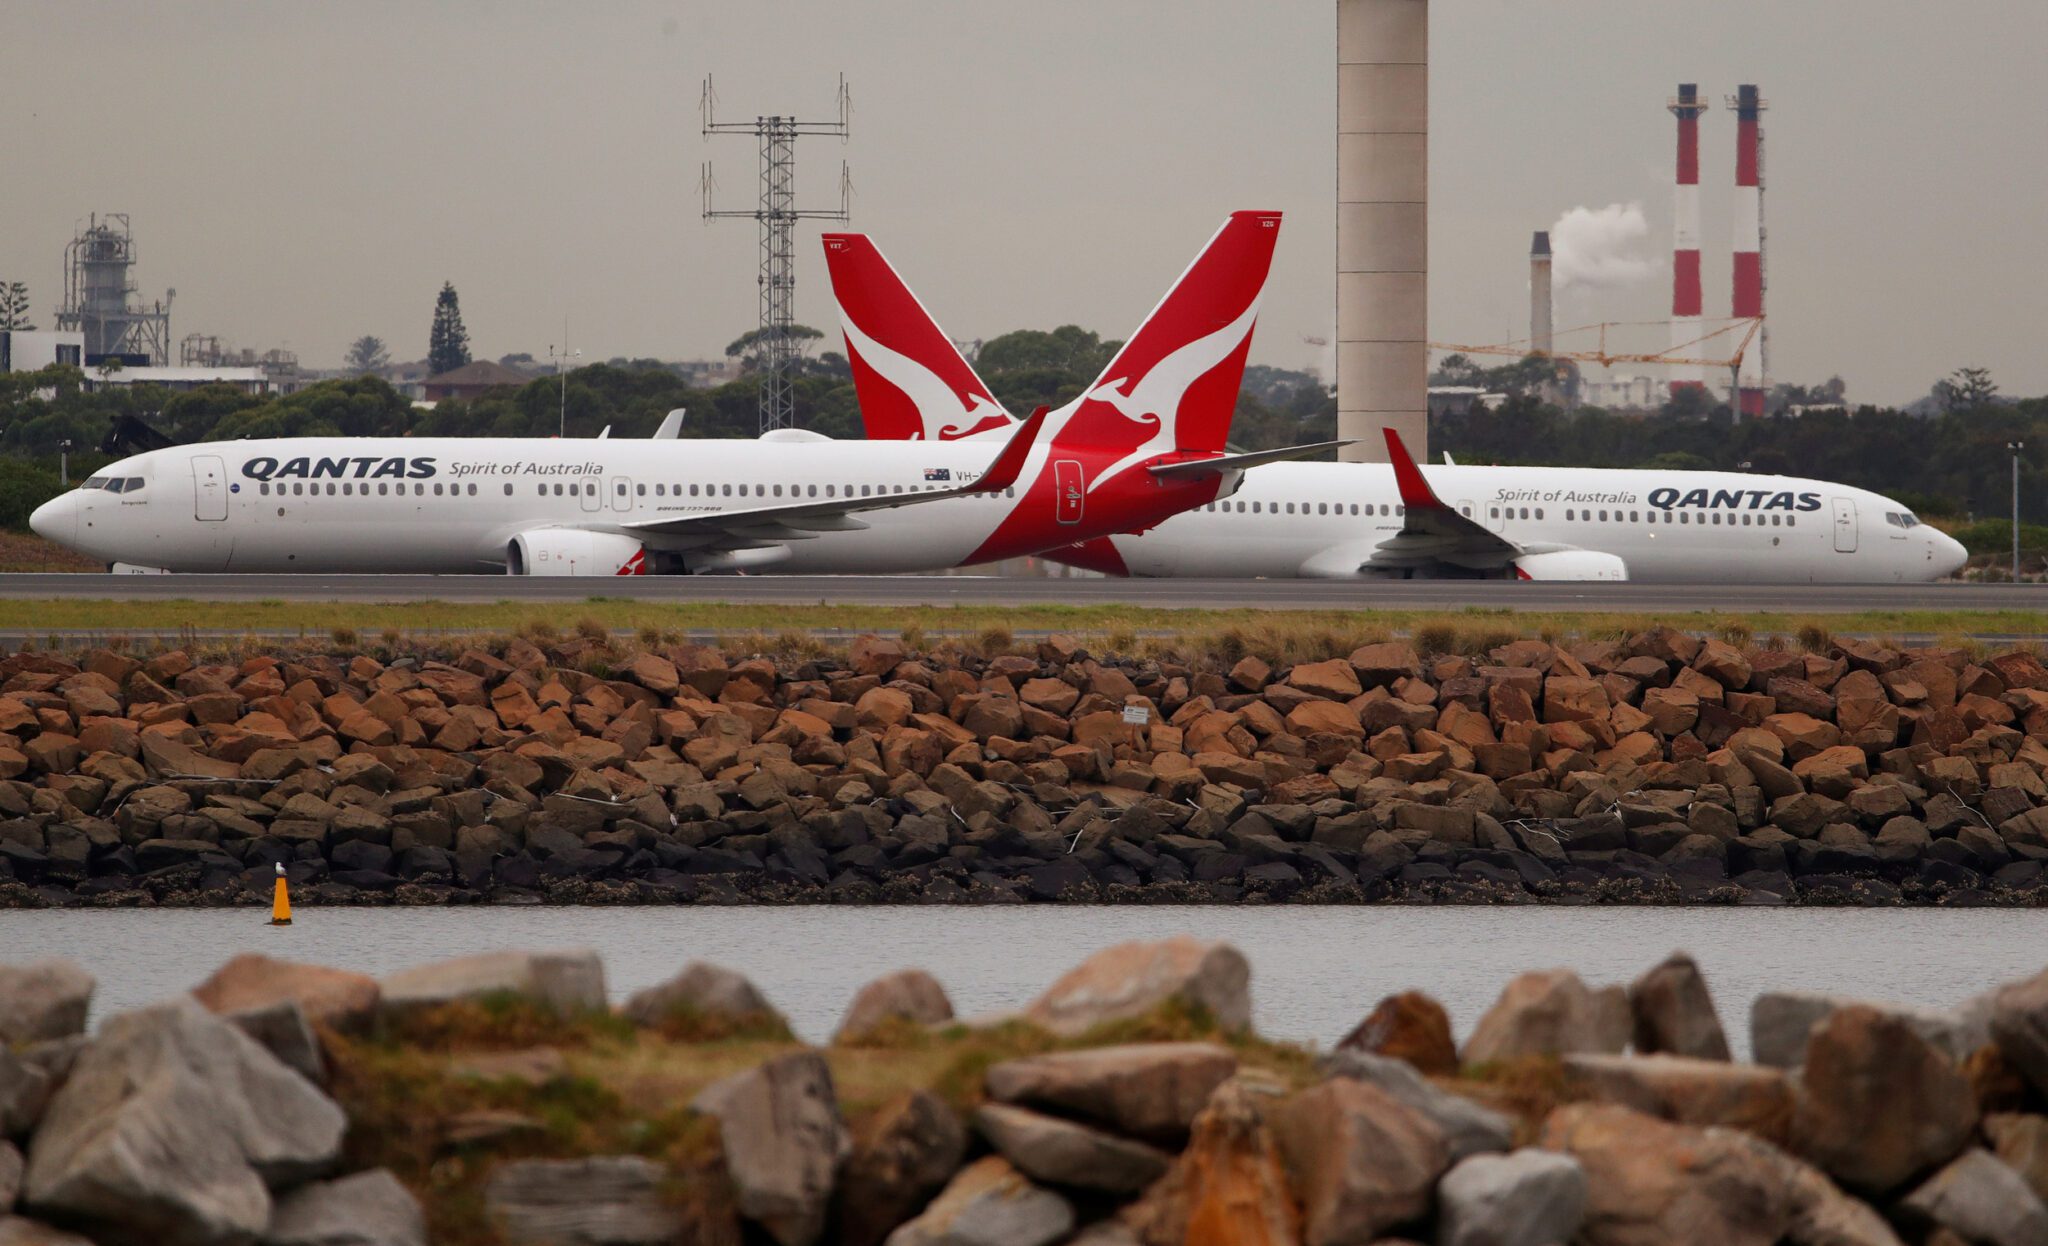 Qantas Boeing 737s taxi at Kingsford Smith International Airport in Sydney, Australia. Source: Reuters